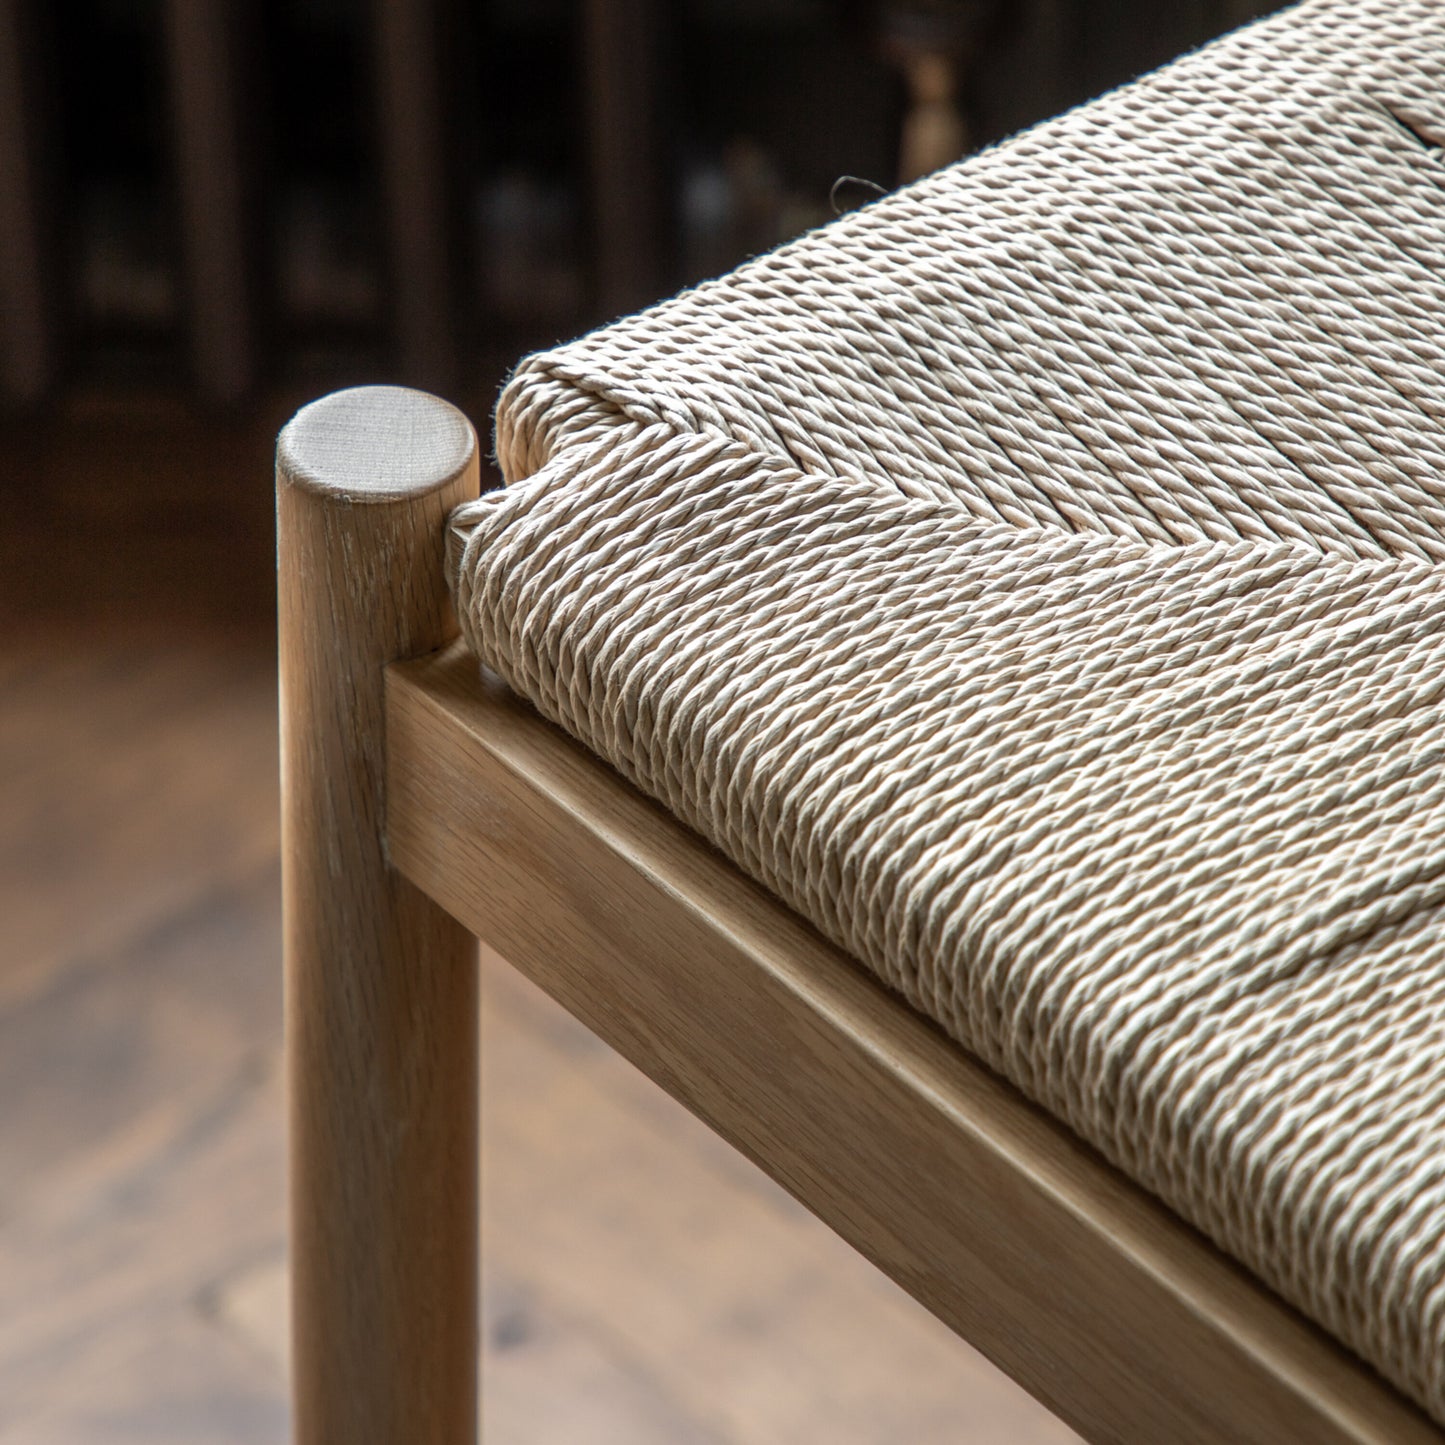 Asher Rope Stool